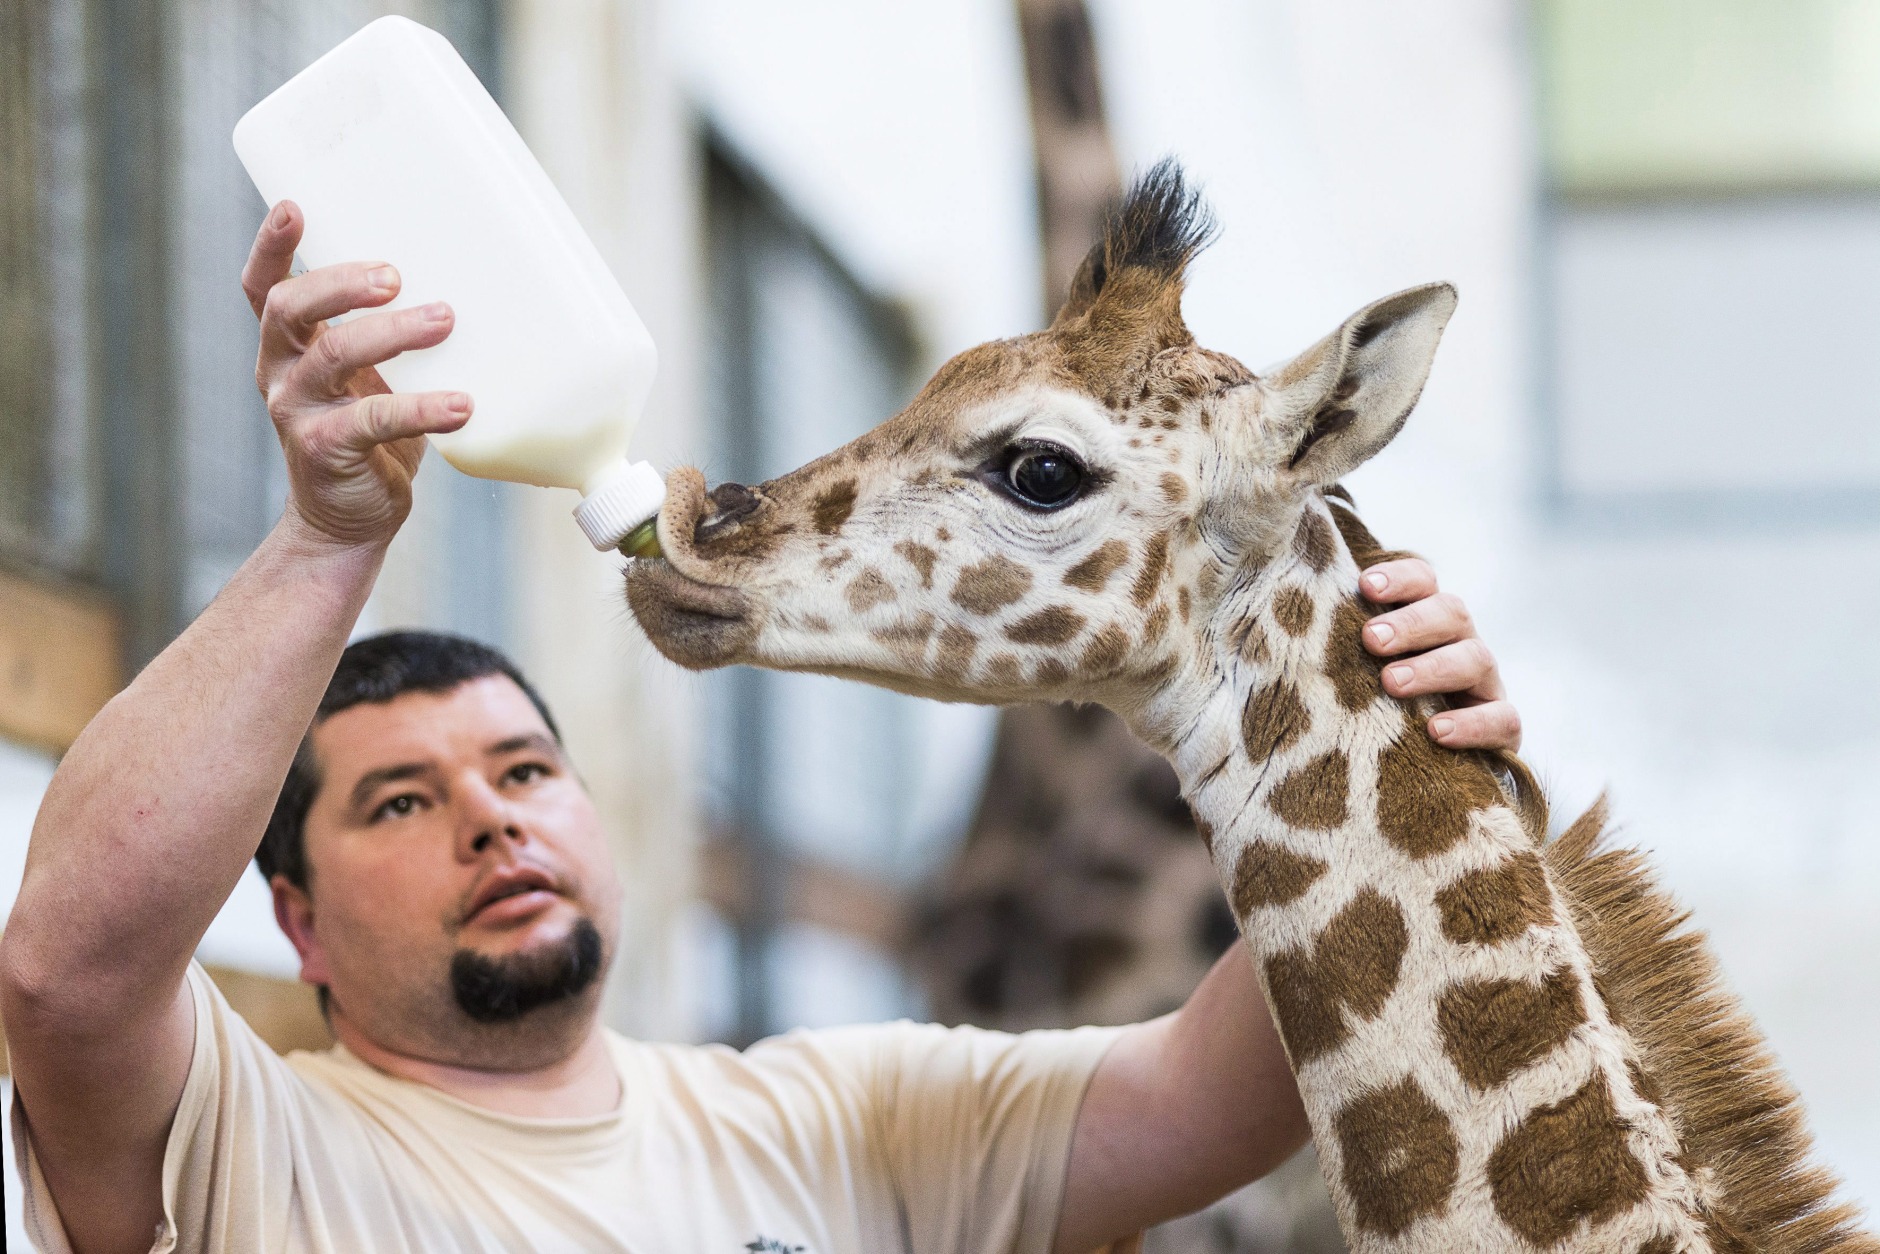 A two-month old giraffe calf, yet unnamed, is bottle-fed by keeper Laszlo Kovacs in the Nyiregyhaza Animal Park in Nyiregyhaza, 245 kms east of Budapest, Hungary, Saturday, Dec. 27, 2014. It happans sometimes that females having their first calves born are unable to breast-feed their offsprings, then keepers bottle-feed the babies till their age of six months. (AP Photo/MTI, Attila Balazs